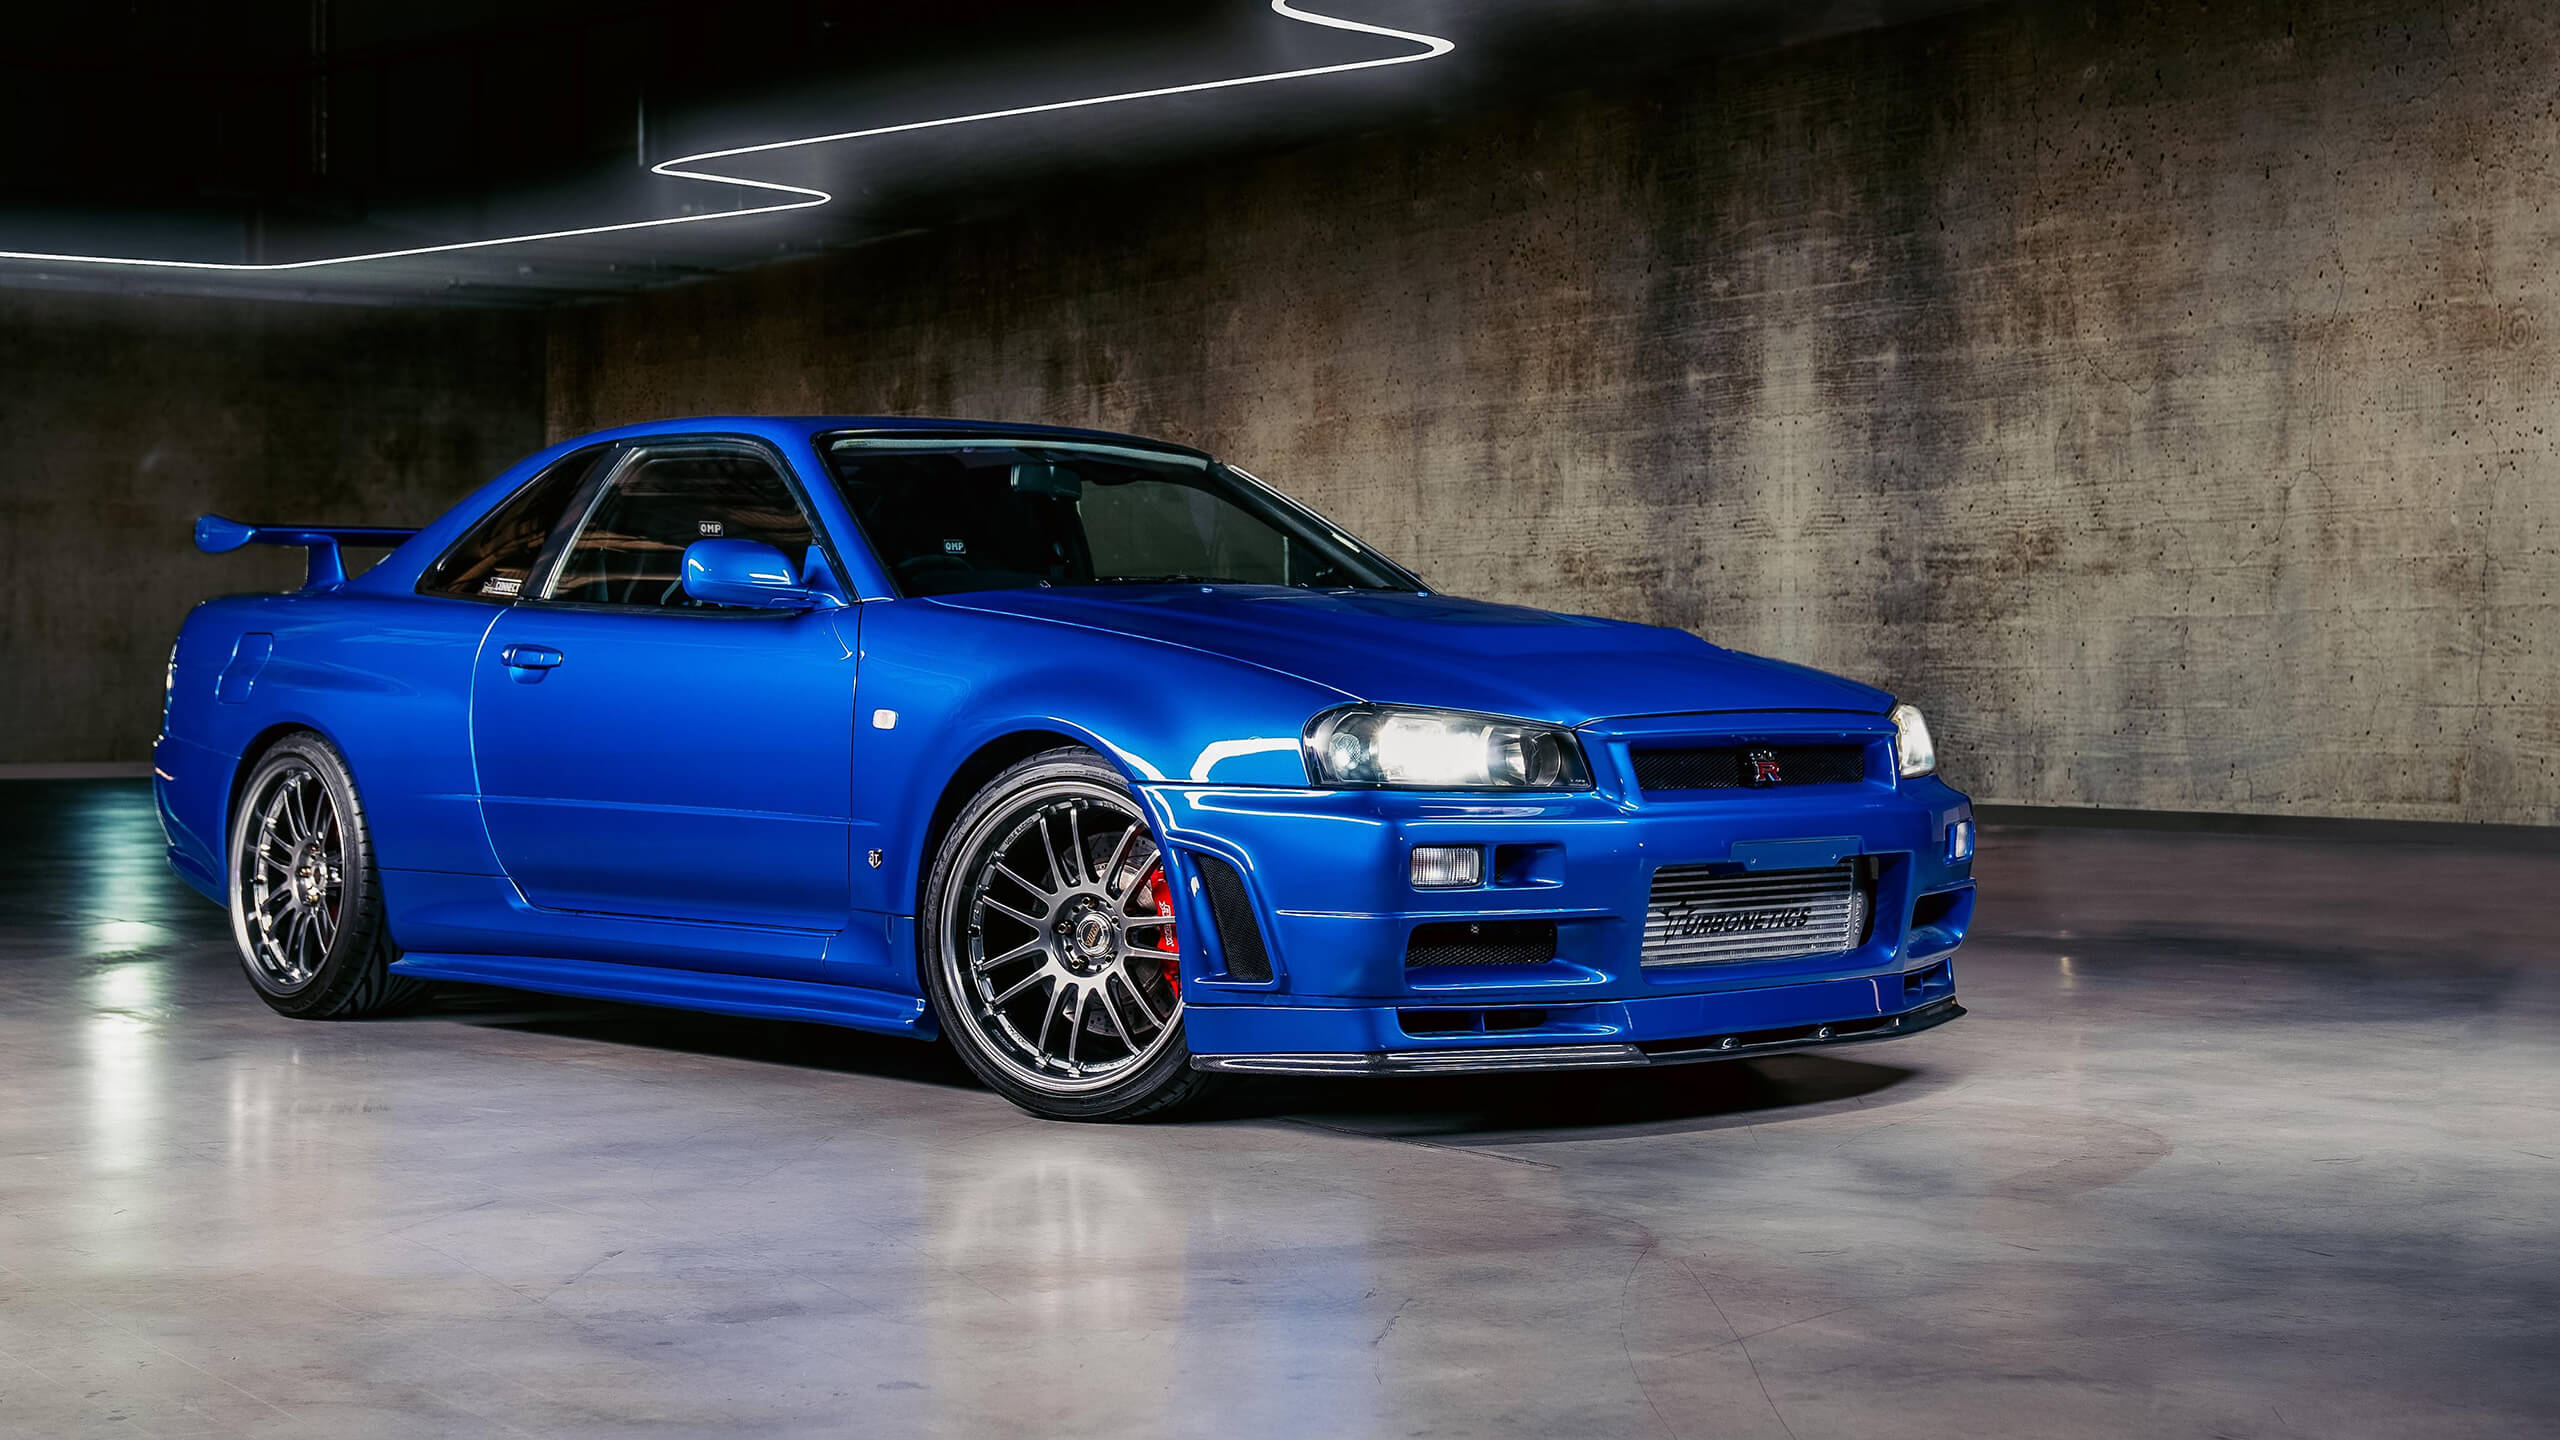 ‘Fast & Furious’ Nissan Skyline R34 GT-R sells for $1.357m